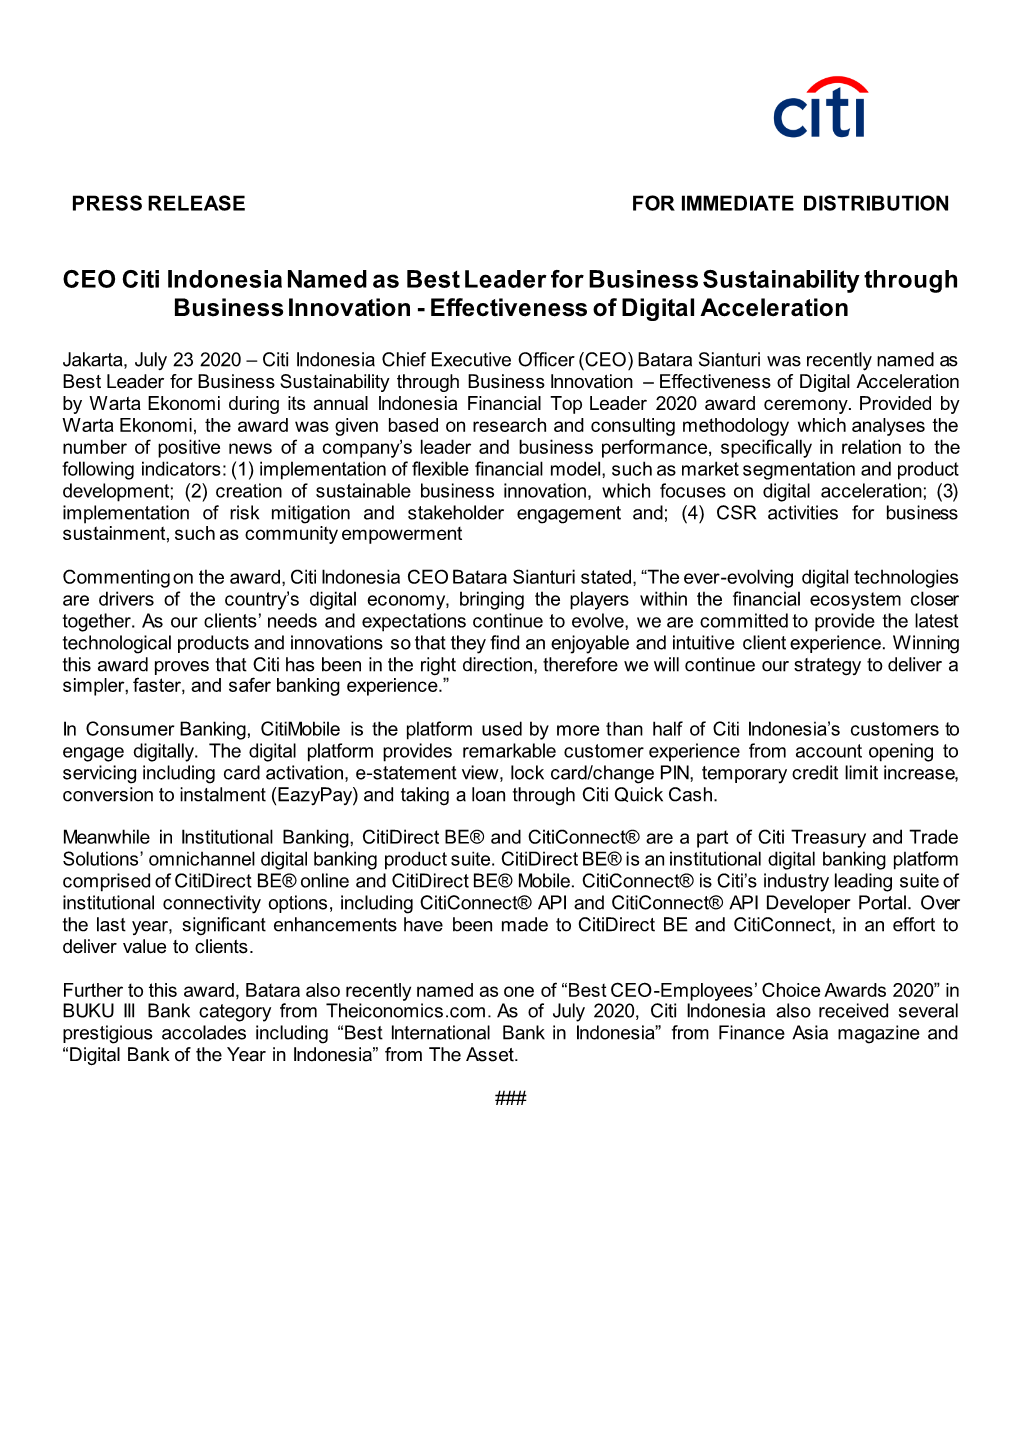 CEO Citi Indonesia Named As Best Leader for Business Sustainability Through Business Innovation - Effectiveness of Digital Acceleration